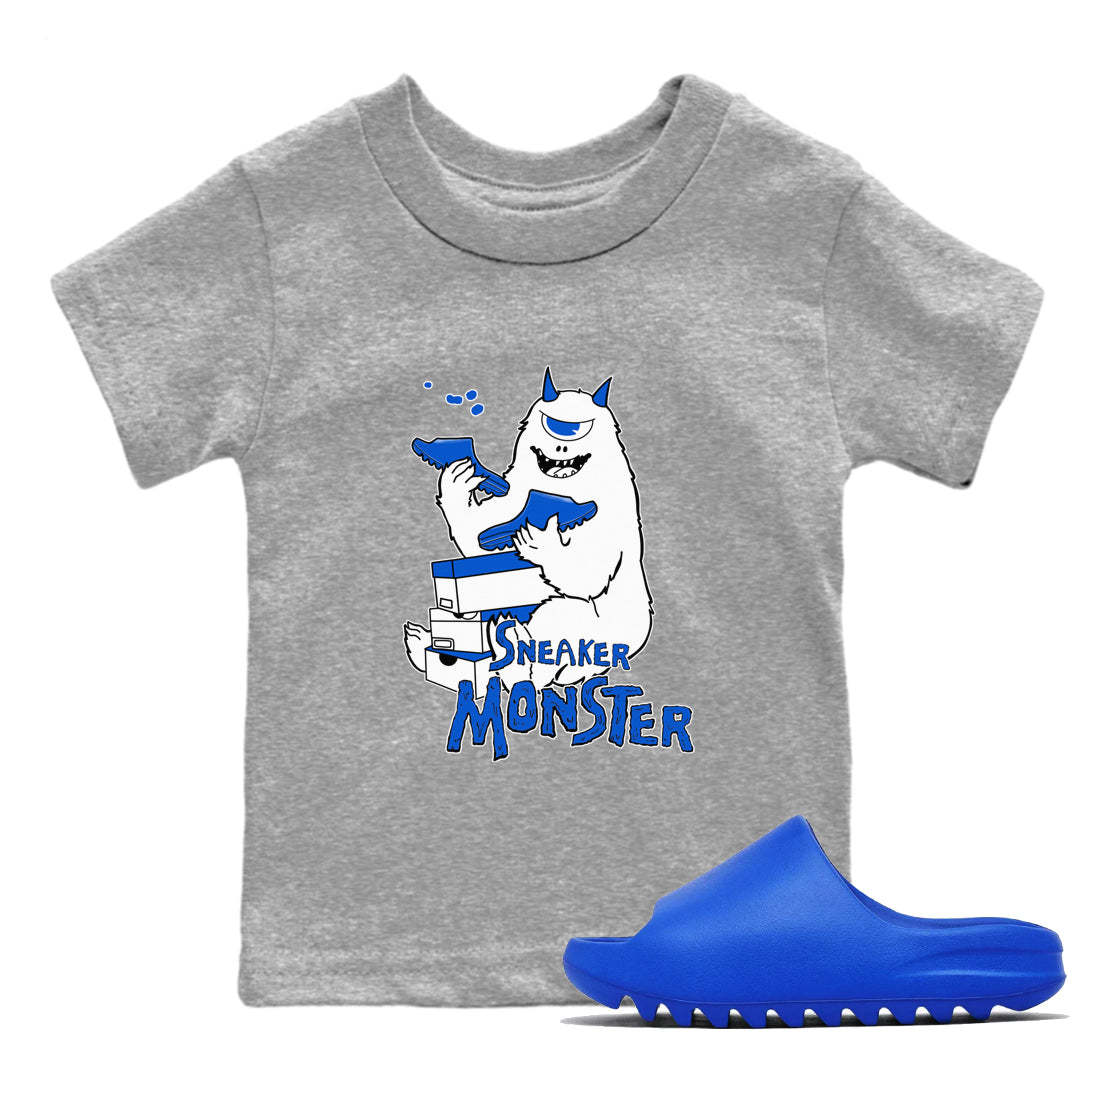 Yeezy Slide Azure shirts to match jordans Sneaker Monster sneaker match tees Yeezy Slide Azure SNRT Sneaker Tees streetwear brand Baby and Youth Heather Grey 1 cotton tee